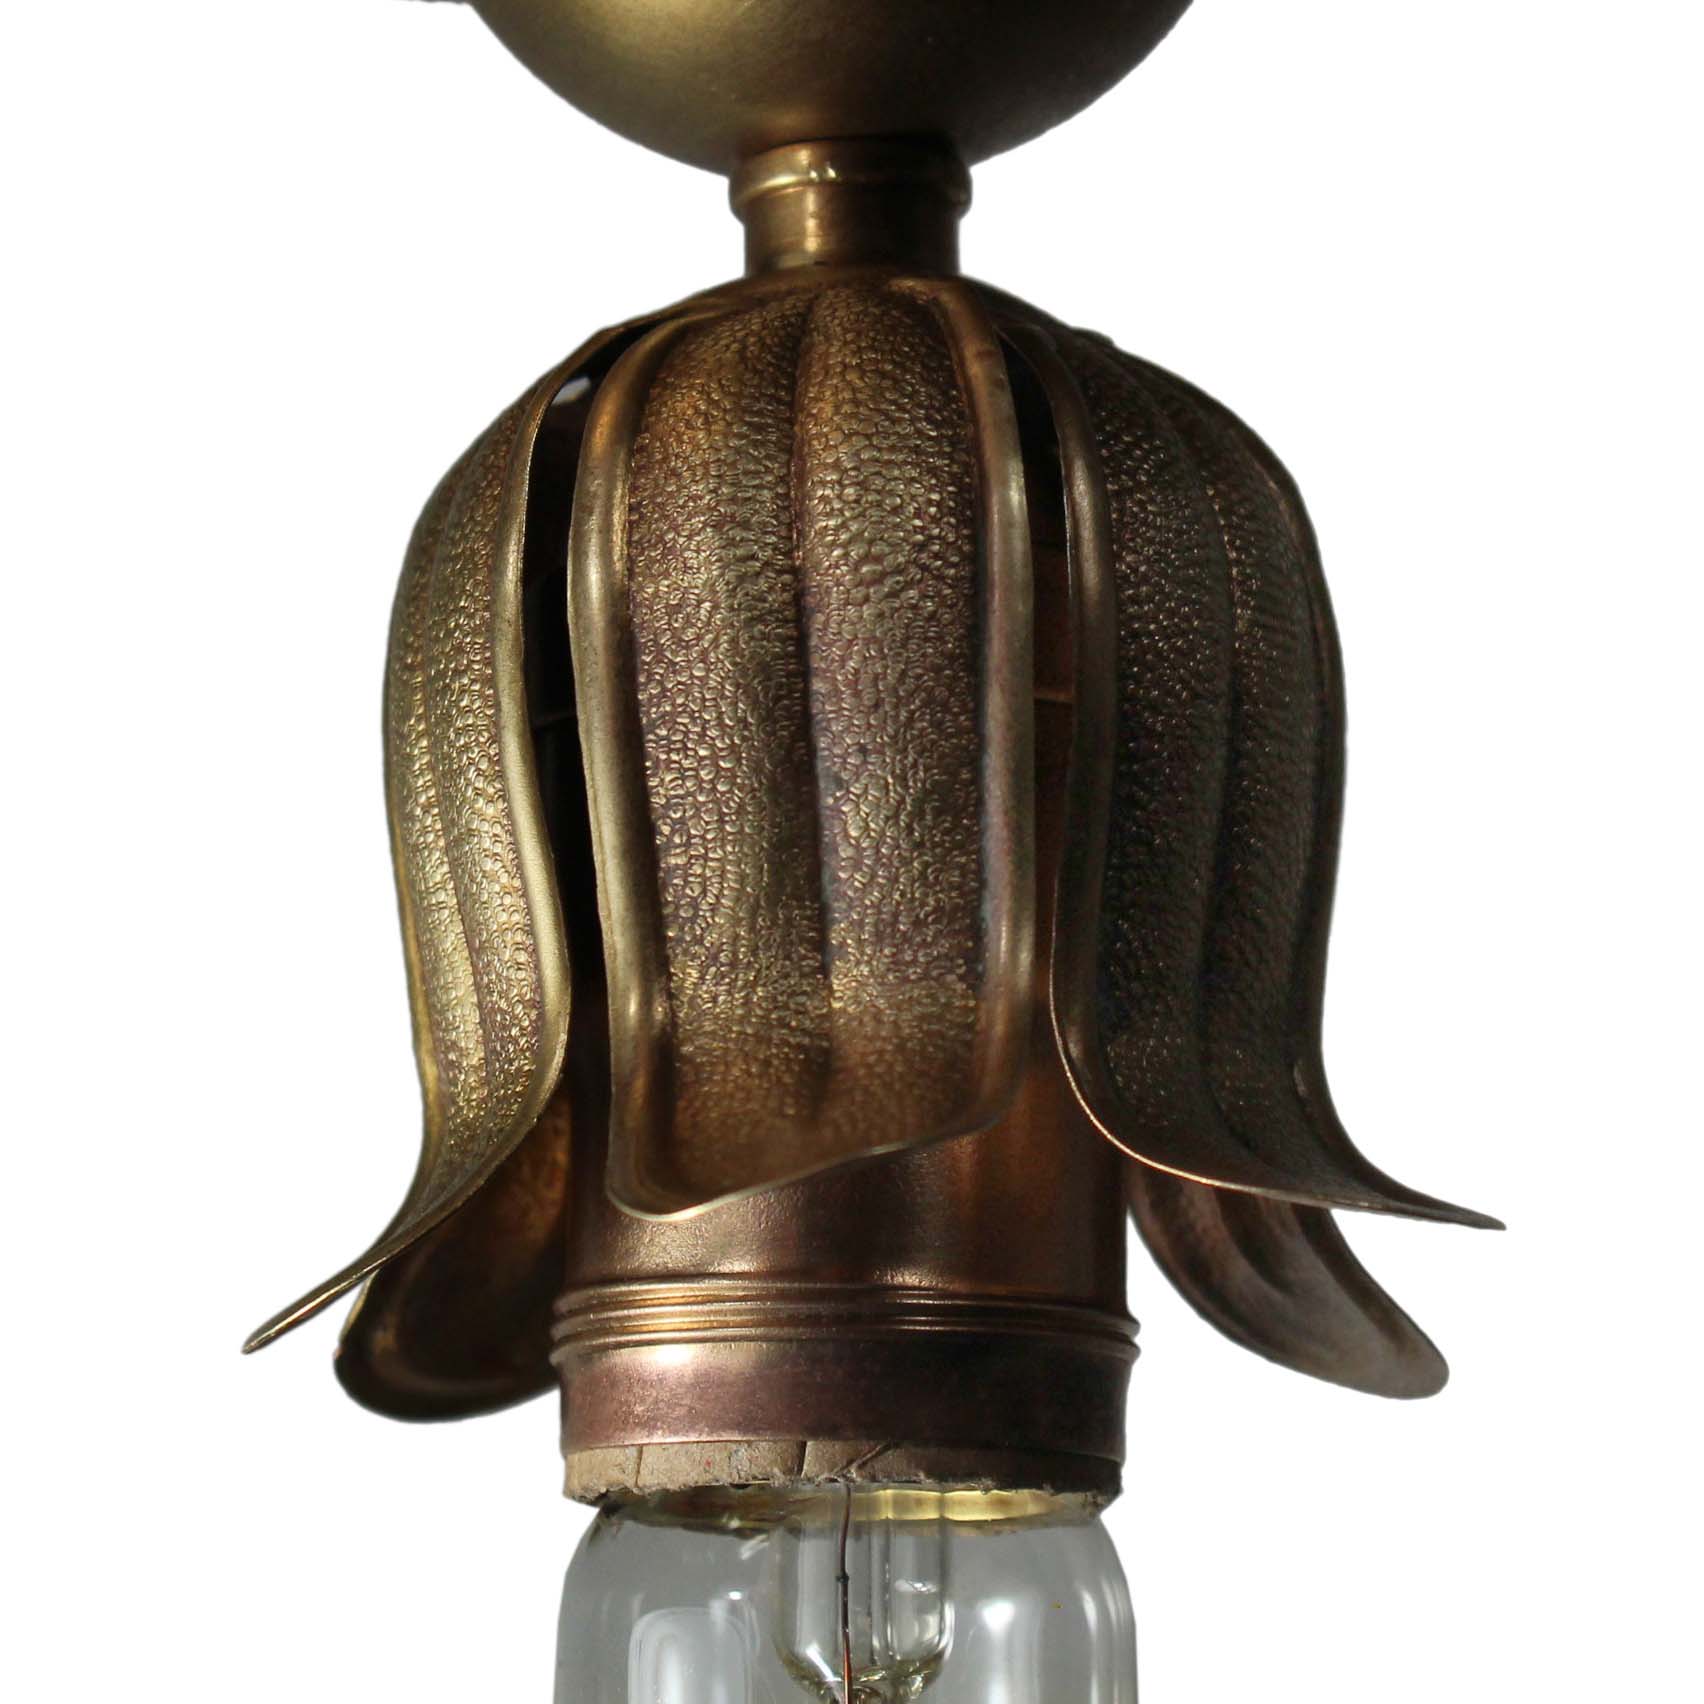 SOLD Brass Flush-Mount Lights with Exposed Bulbs, Antique Lighting-70025